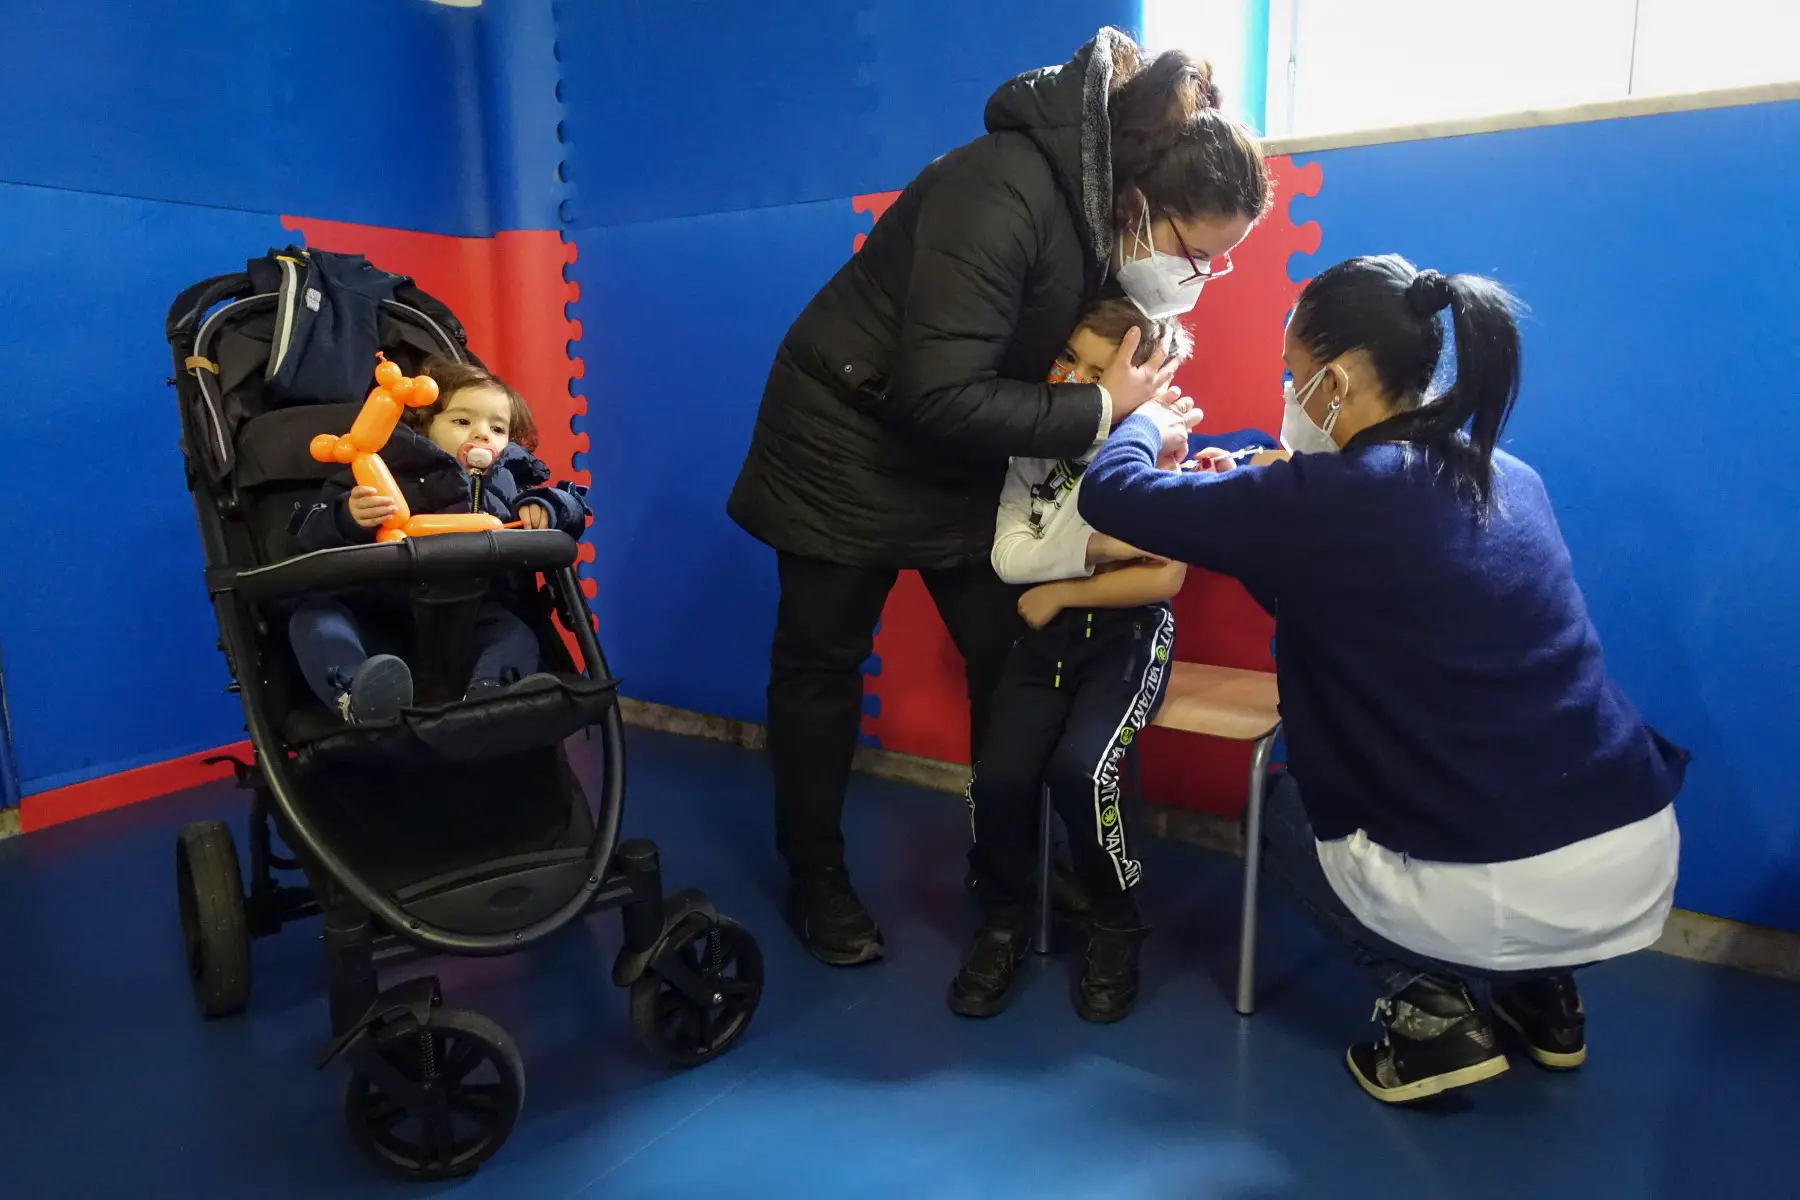 Healthcare professional is administering a COVID vaccine to a child, who is held in their mother's arms. Their sister are sitting nearby in a stroller, holding a balloon animal and looking a bit bored.